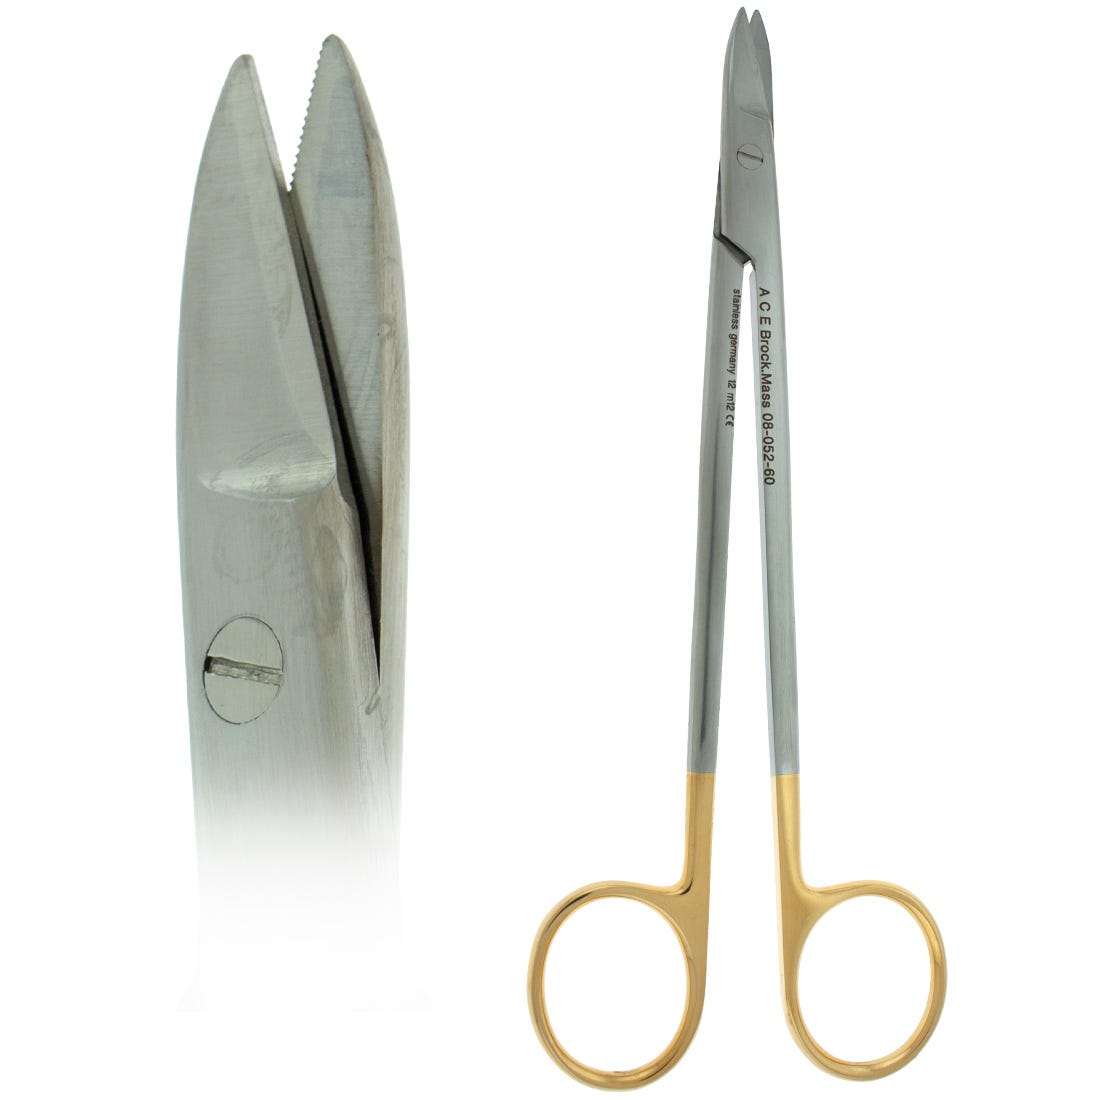 ACE Smith Wire Cutting Scissors, 1 blade serrated, tungsten carbide tips